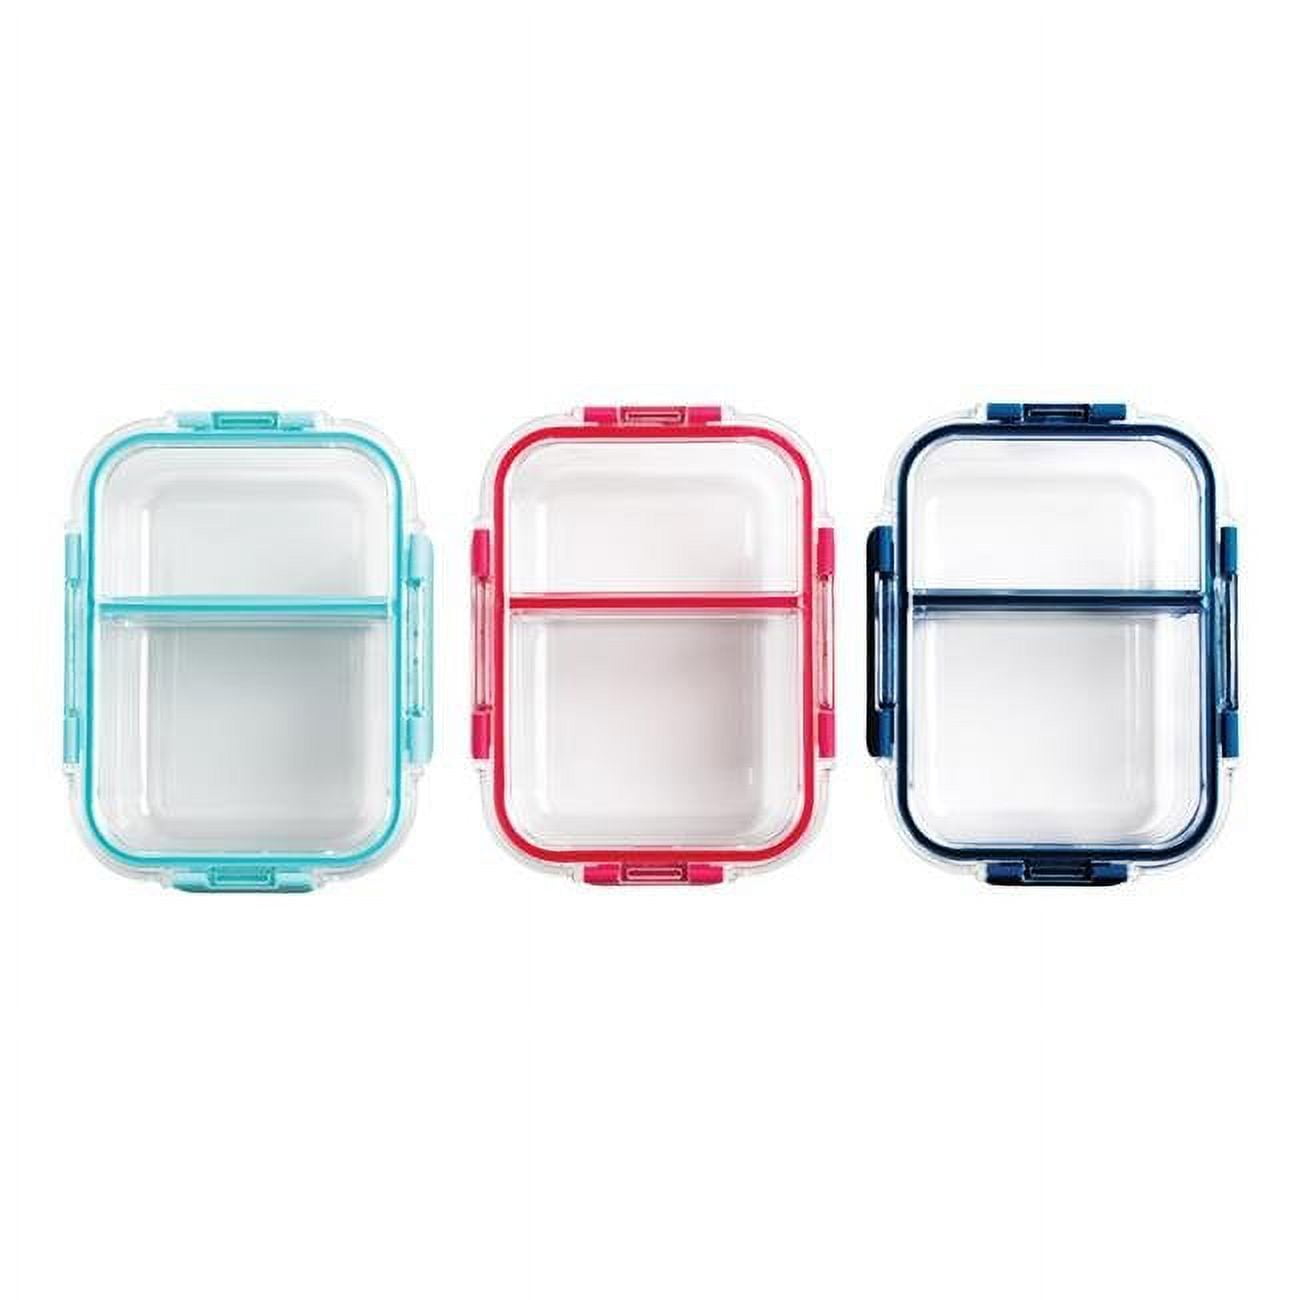 6862536 Truedivide 32 Oz Dual Compartment Food Storage, Clear - Pack Of 12